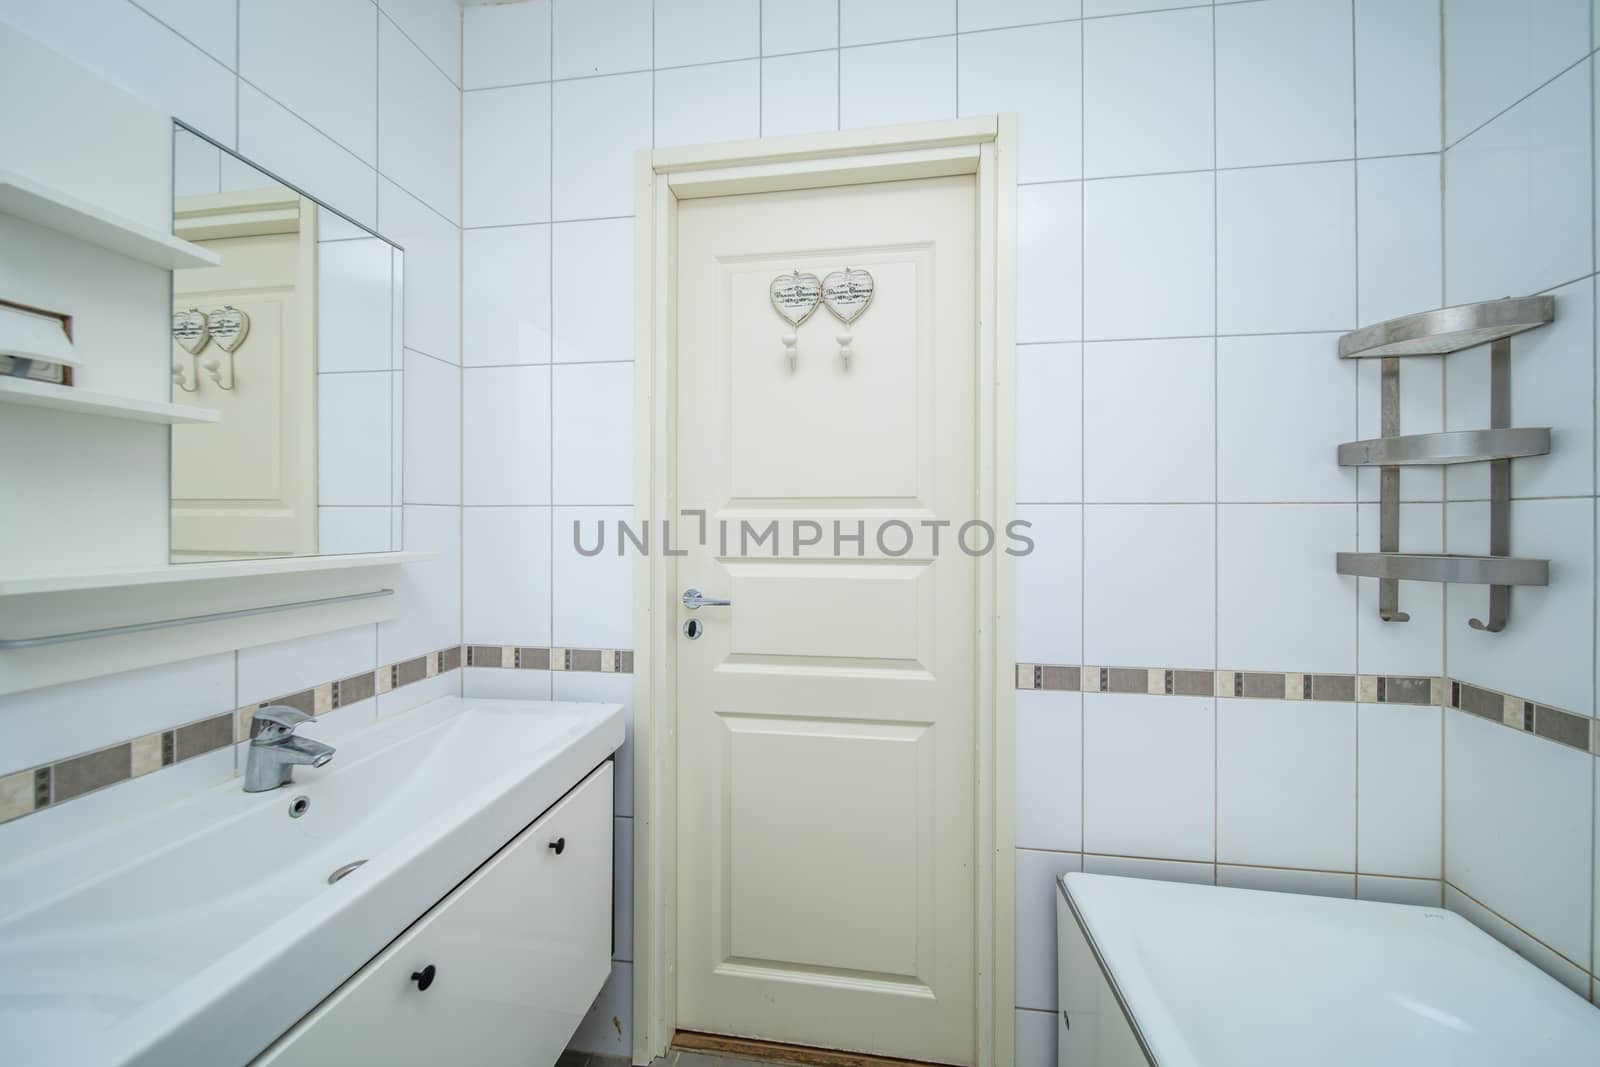 Small beige tile bathroom with bath tube and sink